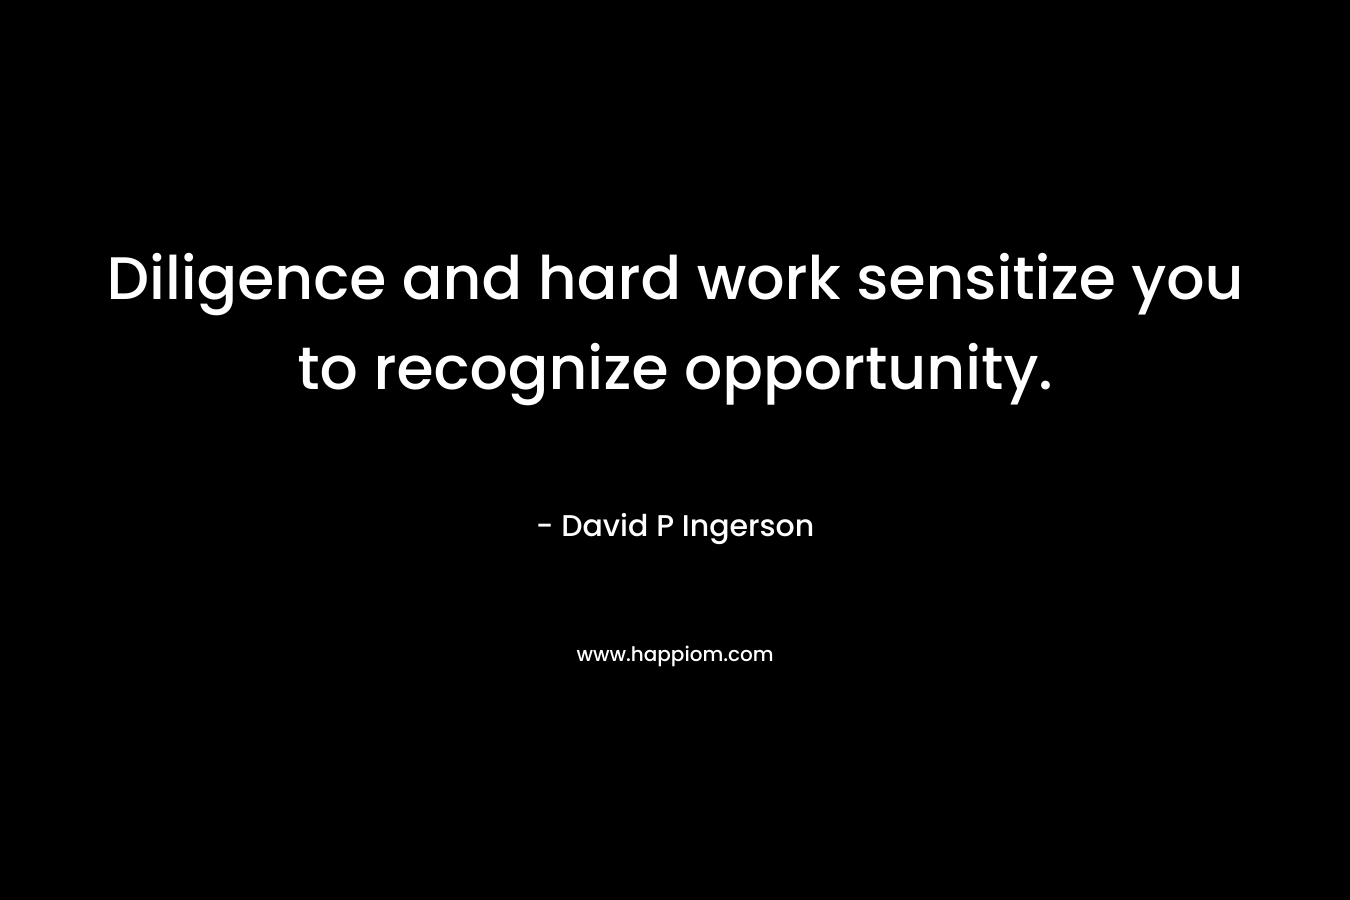 Diligence and hard work sensitize you to recognize opportunity. – David P Ingerson